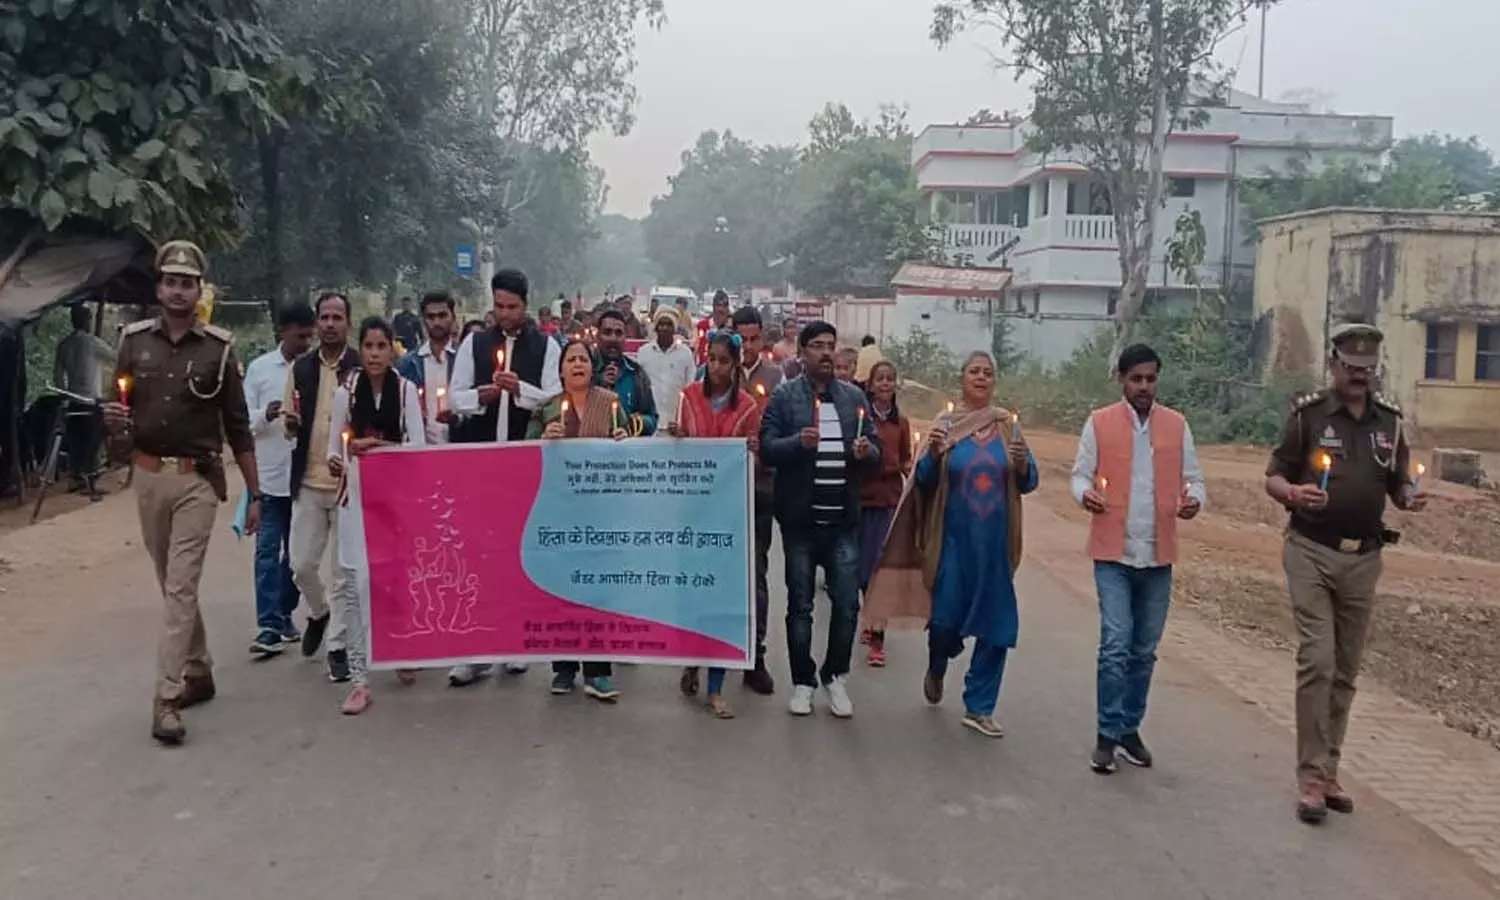 In Chandauli, girls took out a candle procession under the fortnight campaign against violence against women.